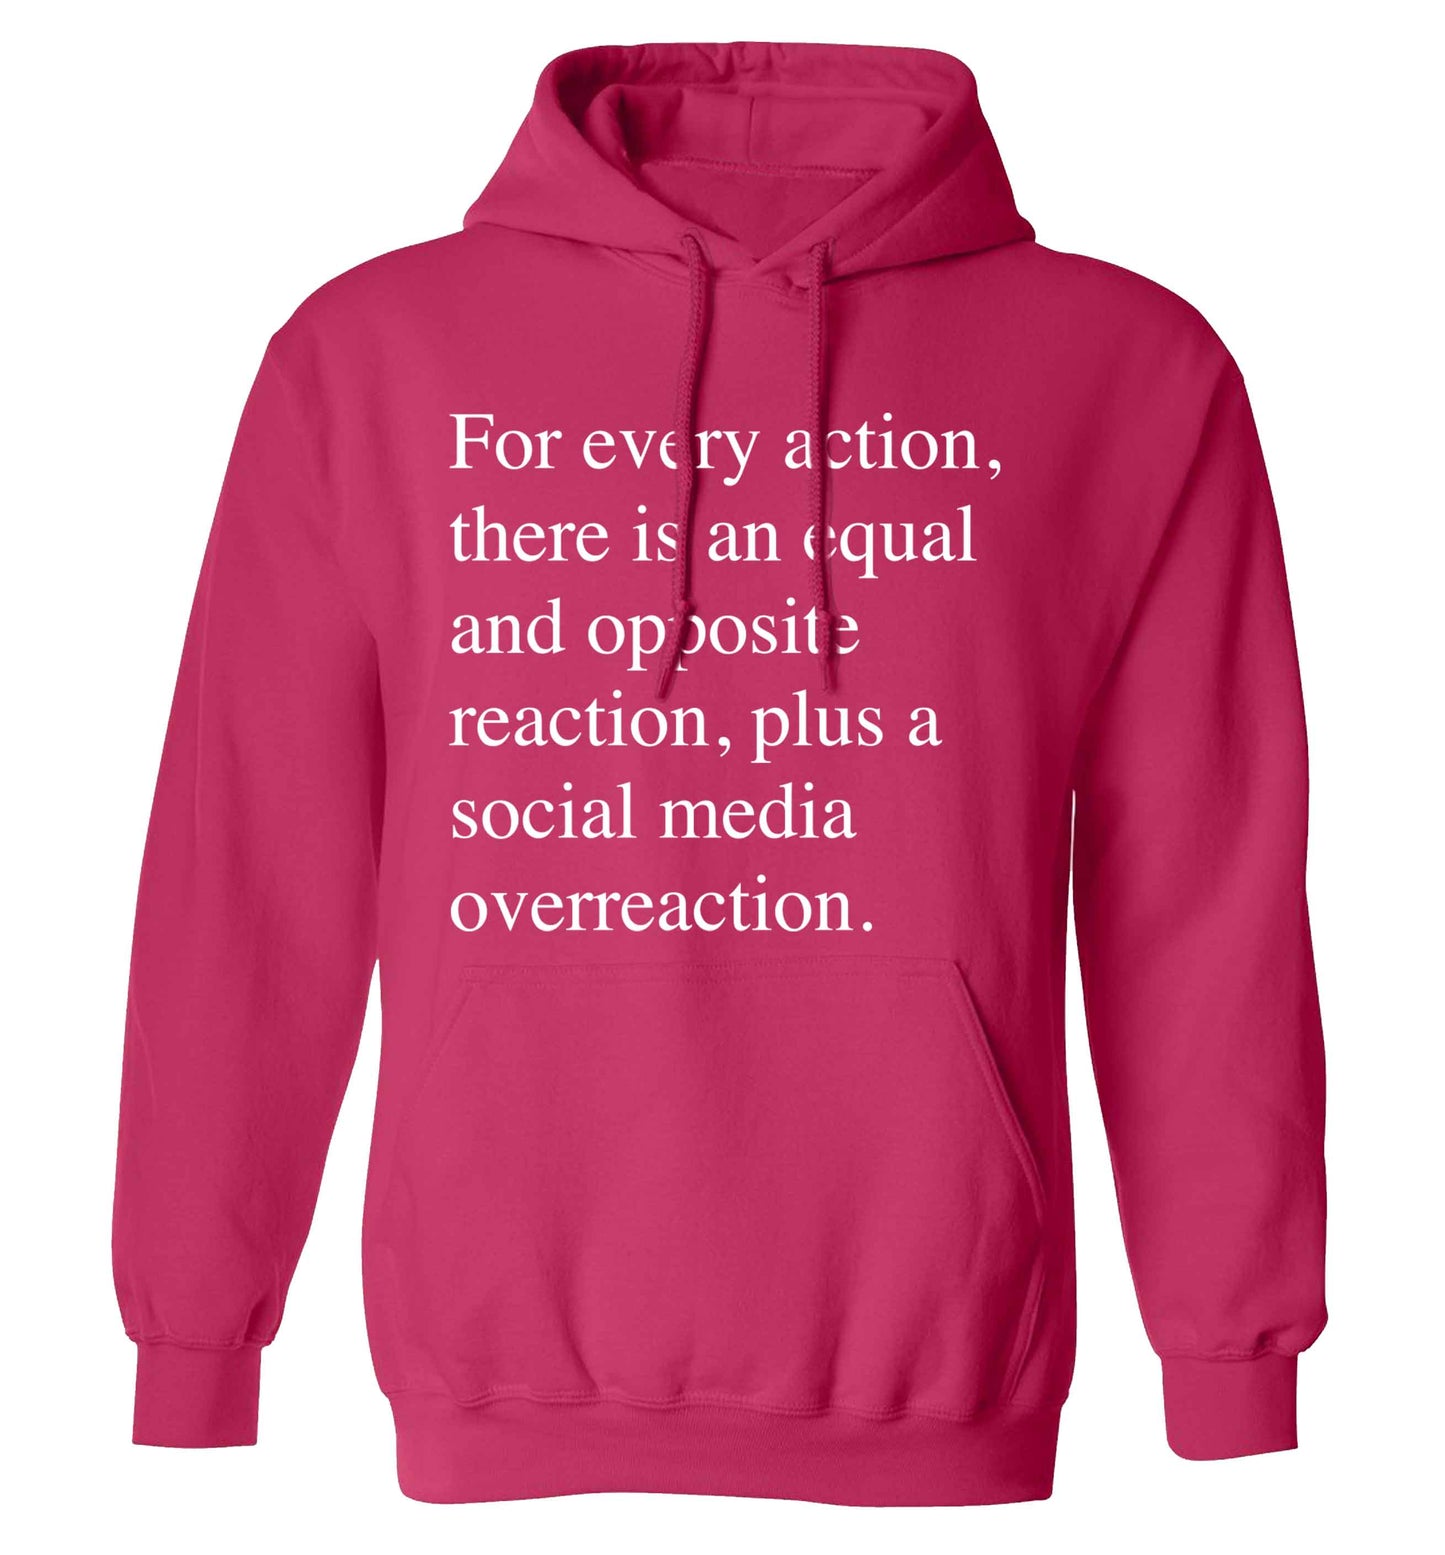 For every action...social media overreaction adults unisex pink hoodie 2XL